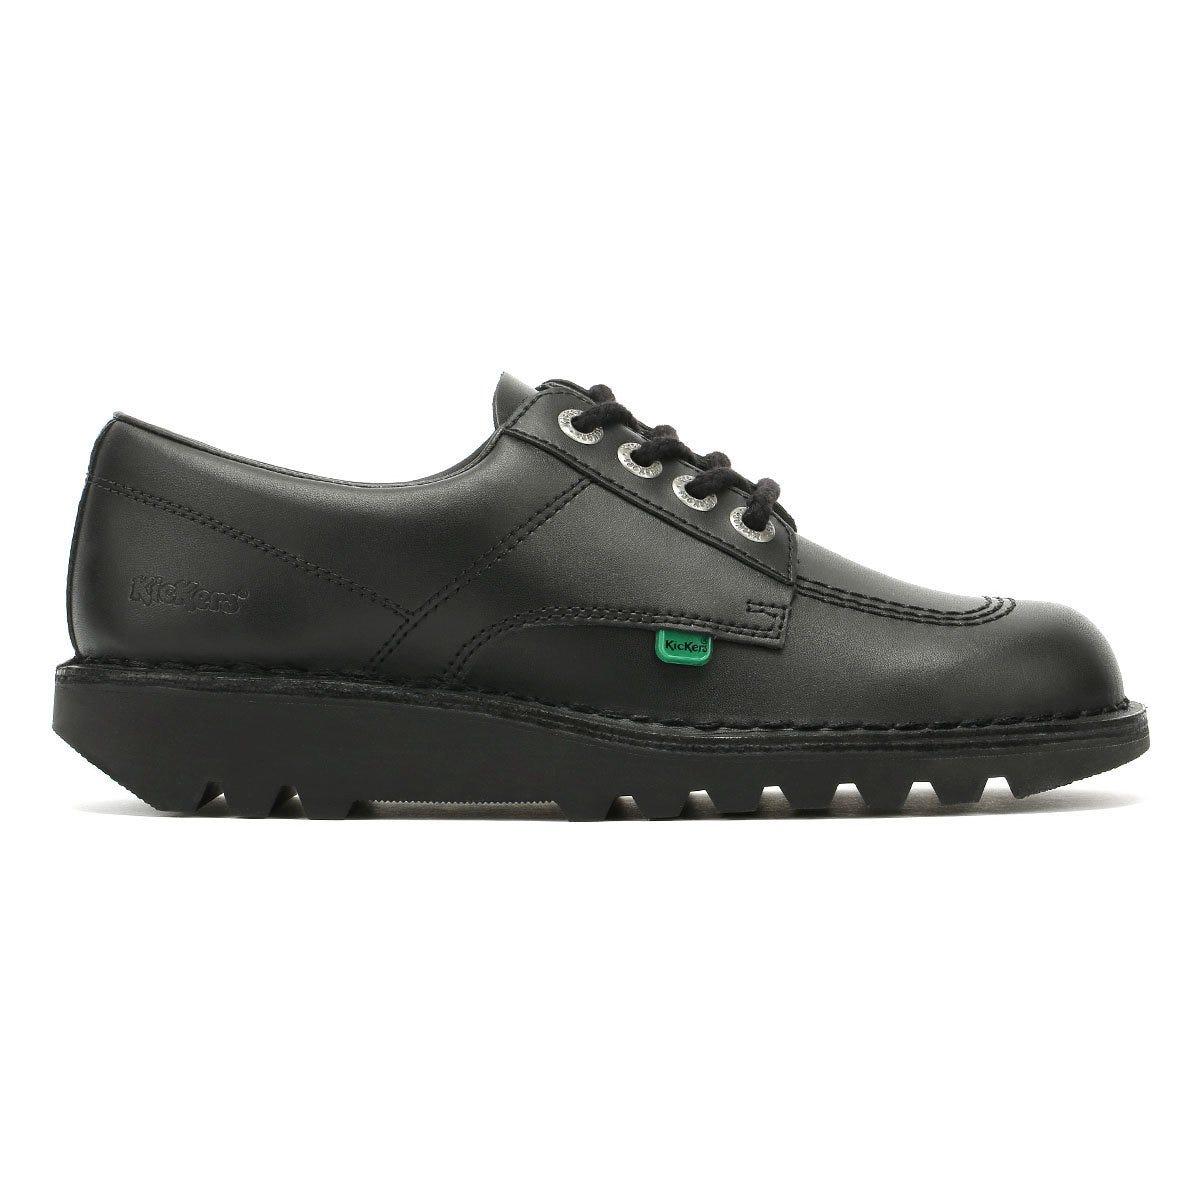 Kickers Kick Lo Mens Black Leather Shoes for Men - Lyst